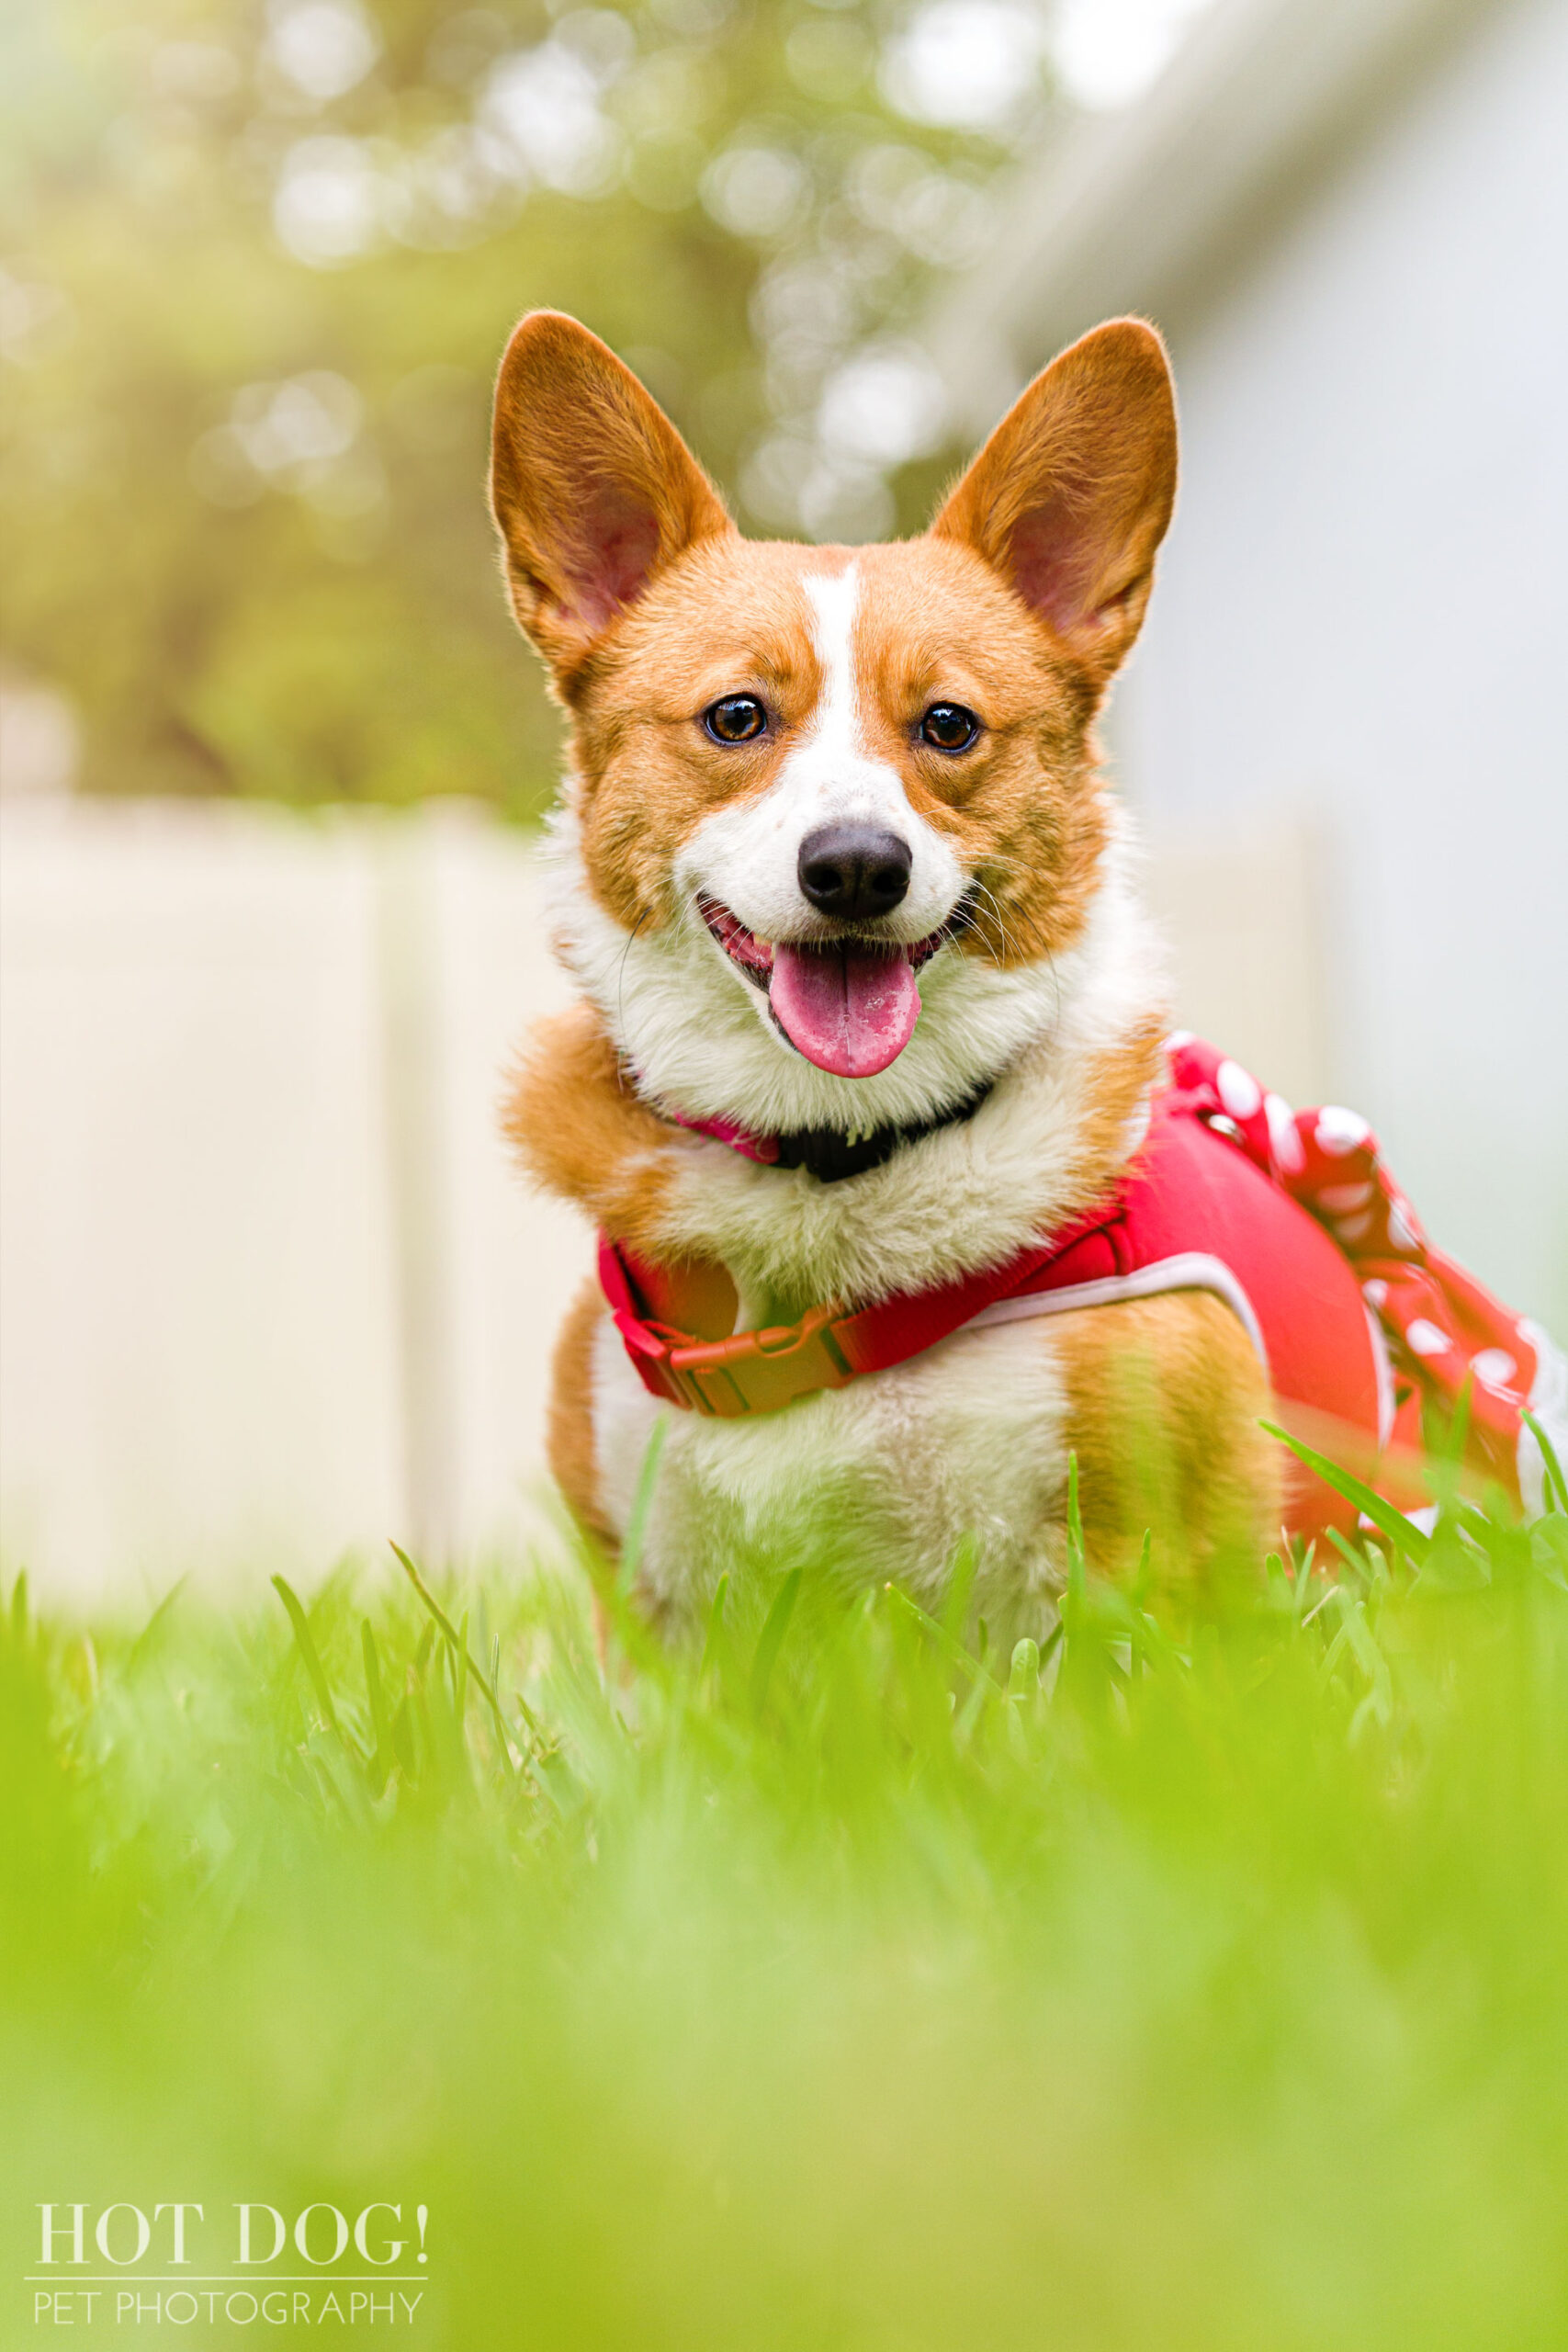 Cinnamon the corgi is the star of this professional pet photo session by Hot Dog! Pet Photography.